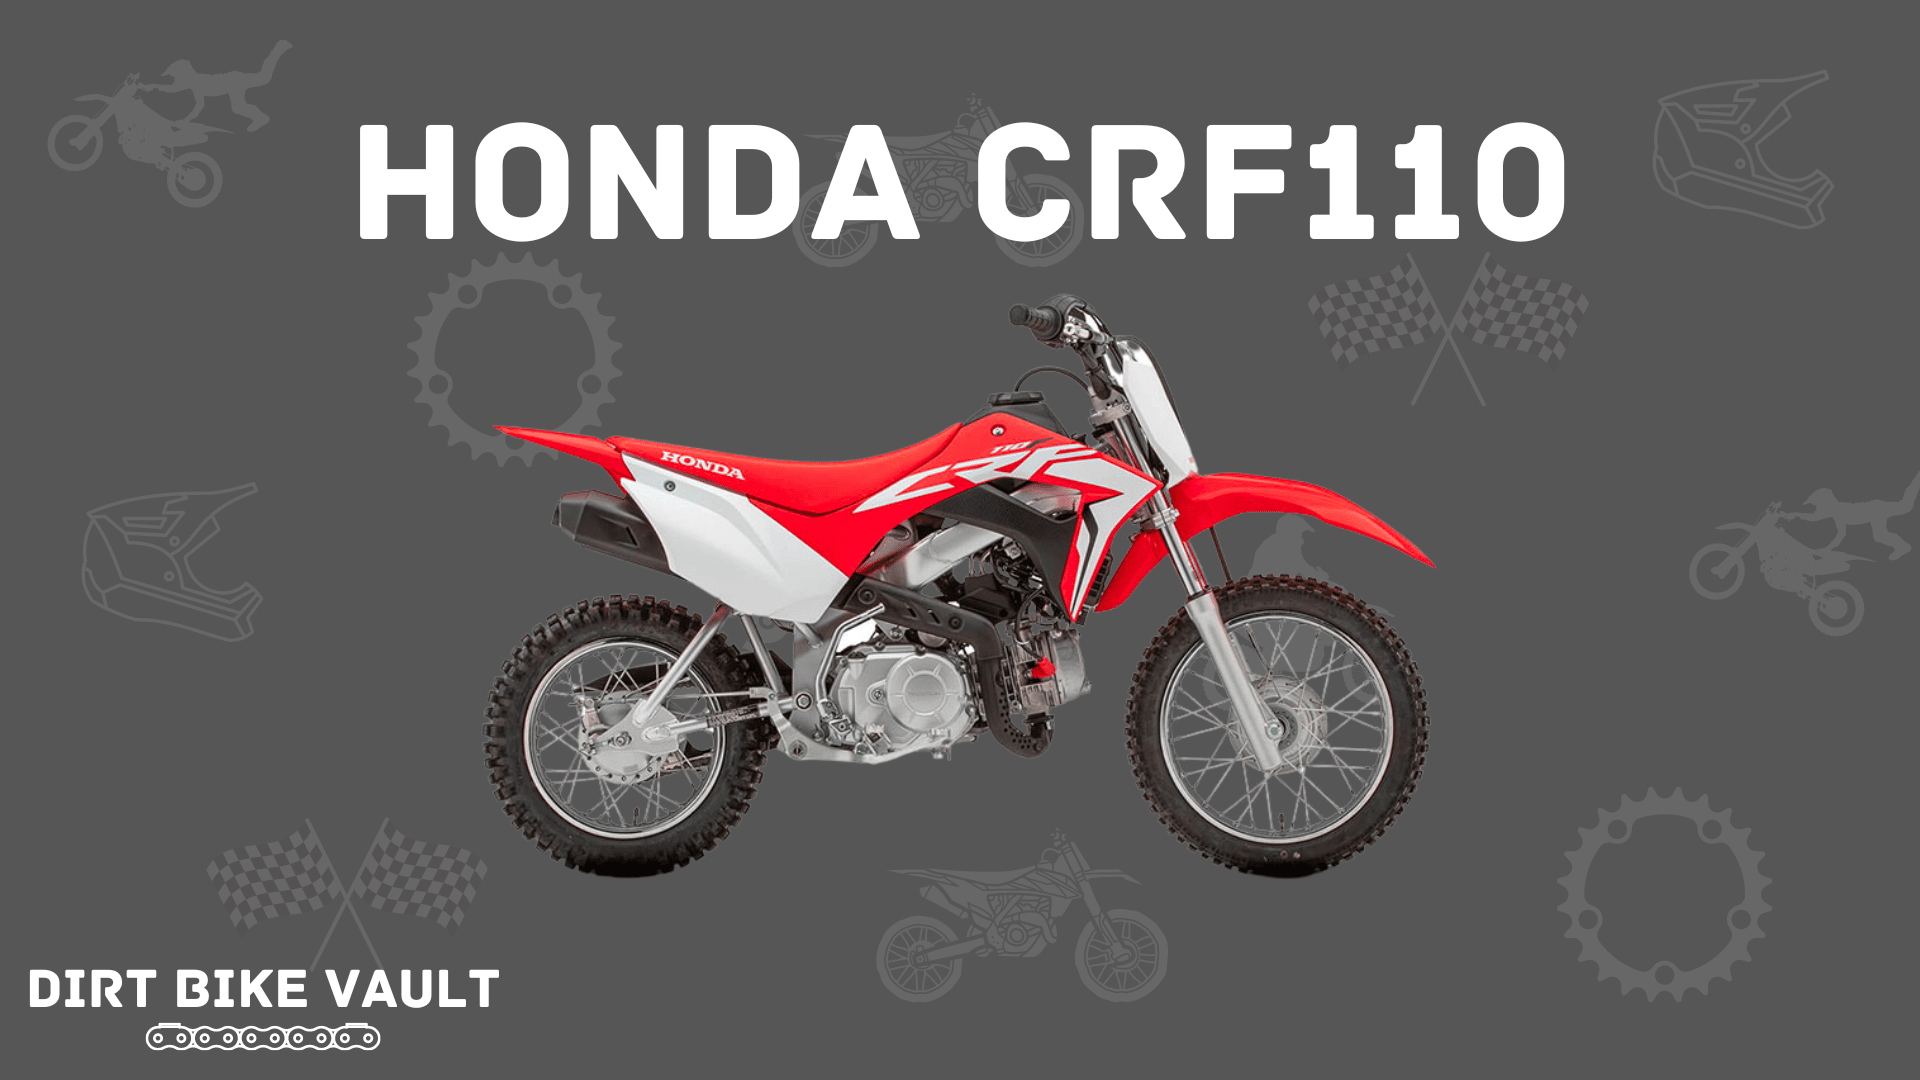 Honda CRF 110 in white text on gray background with him of CRF110 dirt bike